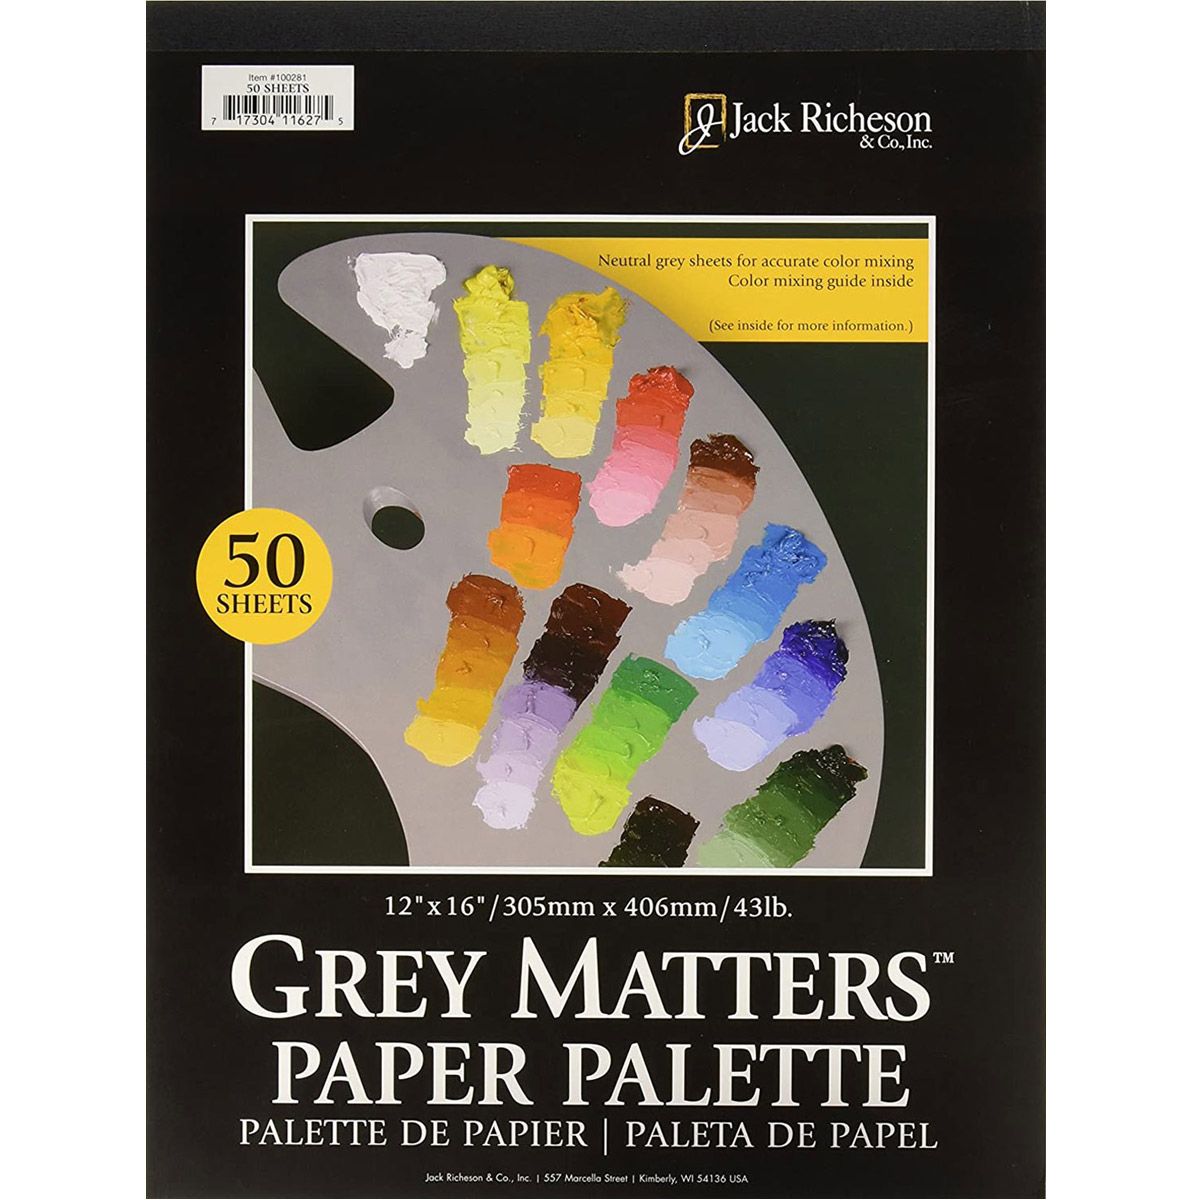 Jack Richeson Grey Matters Palette 50 Sheet Pad, 12 x 16 inches